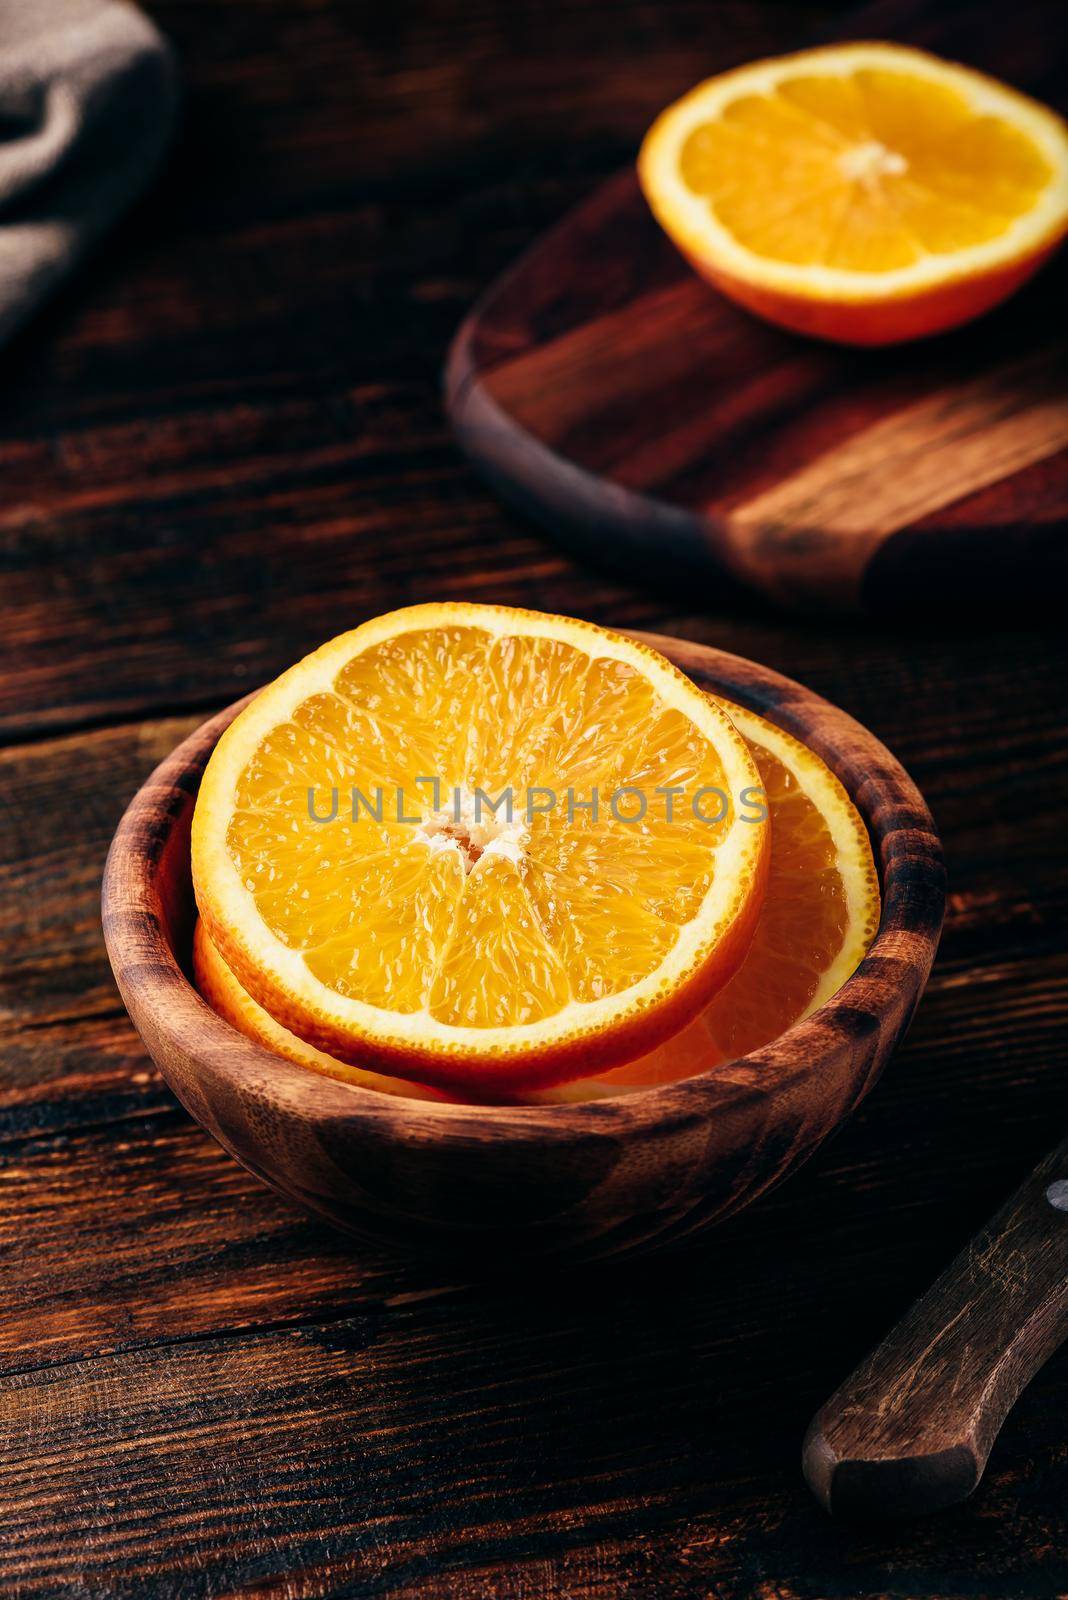 Sliced orange in a wooden bowl in rustic setting